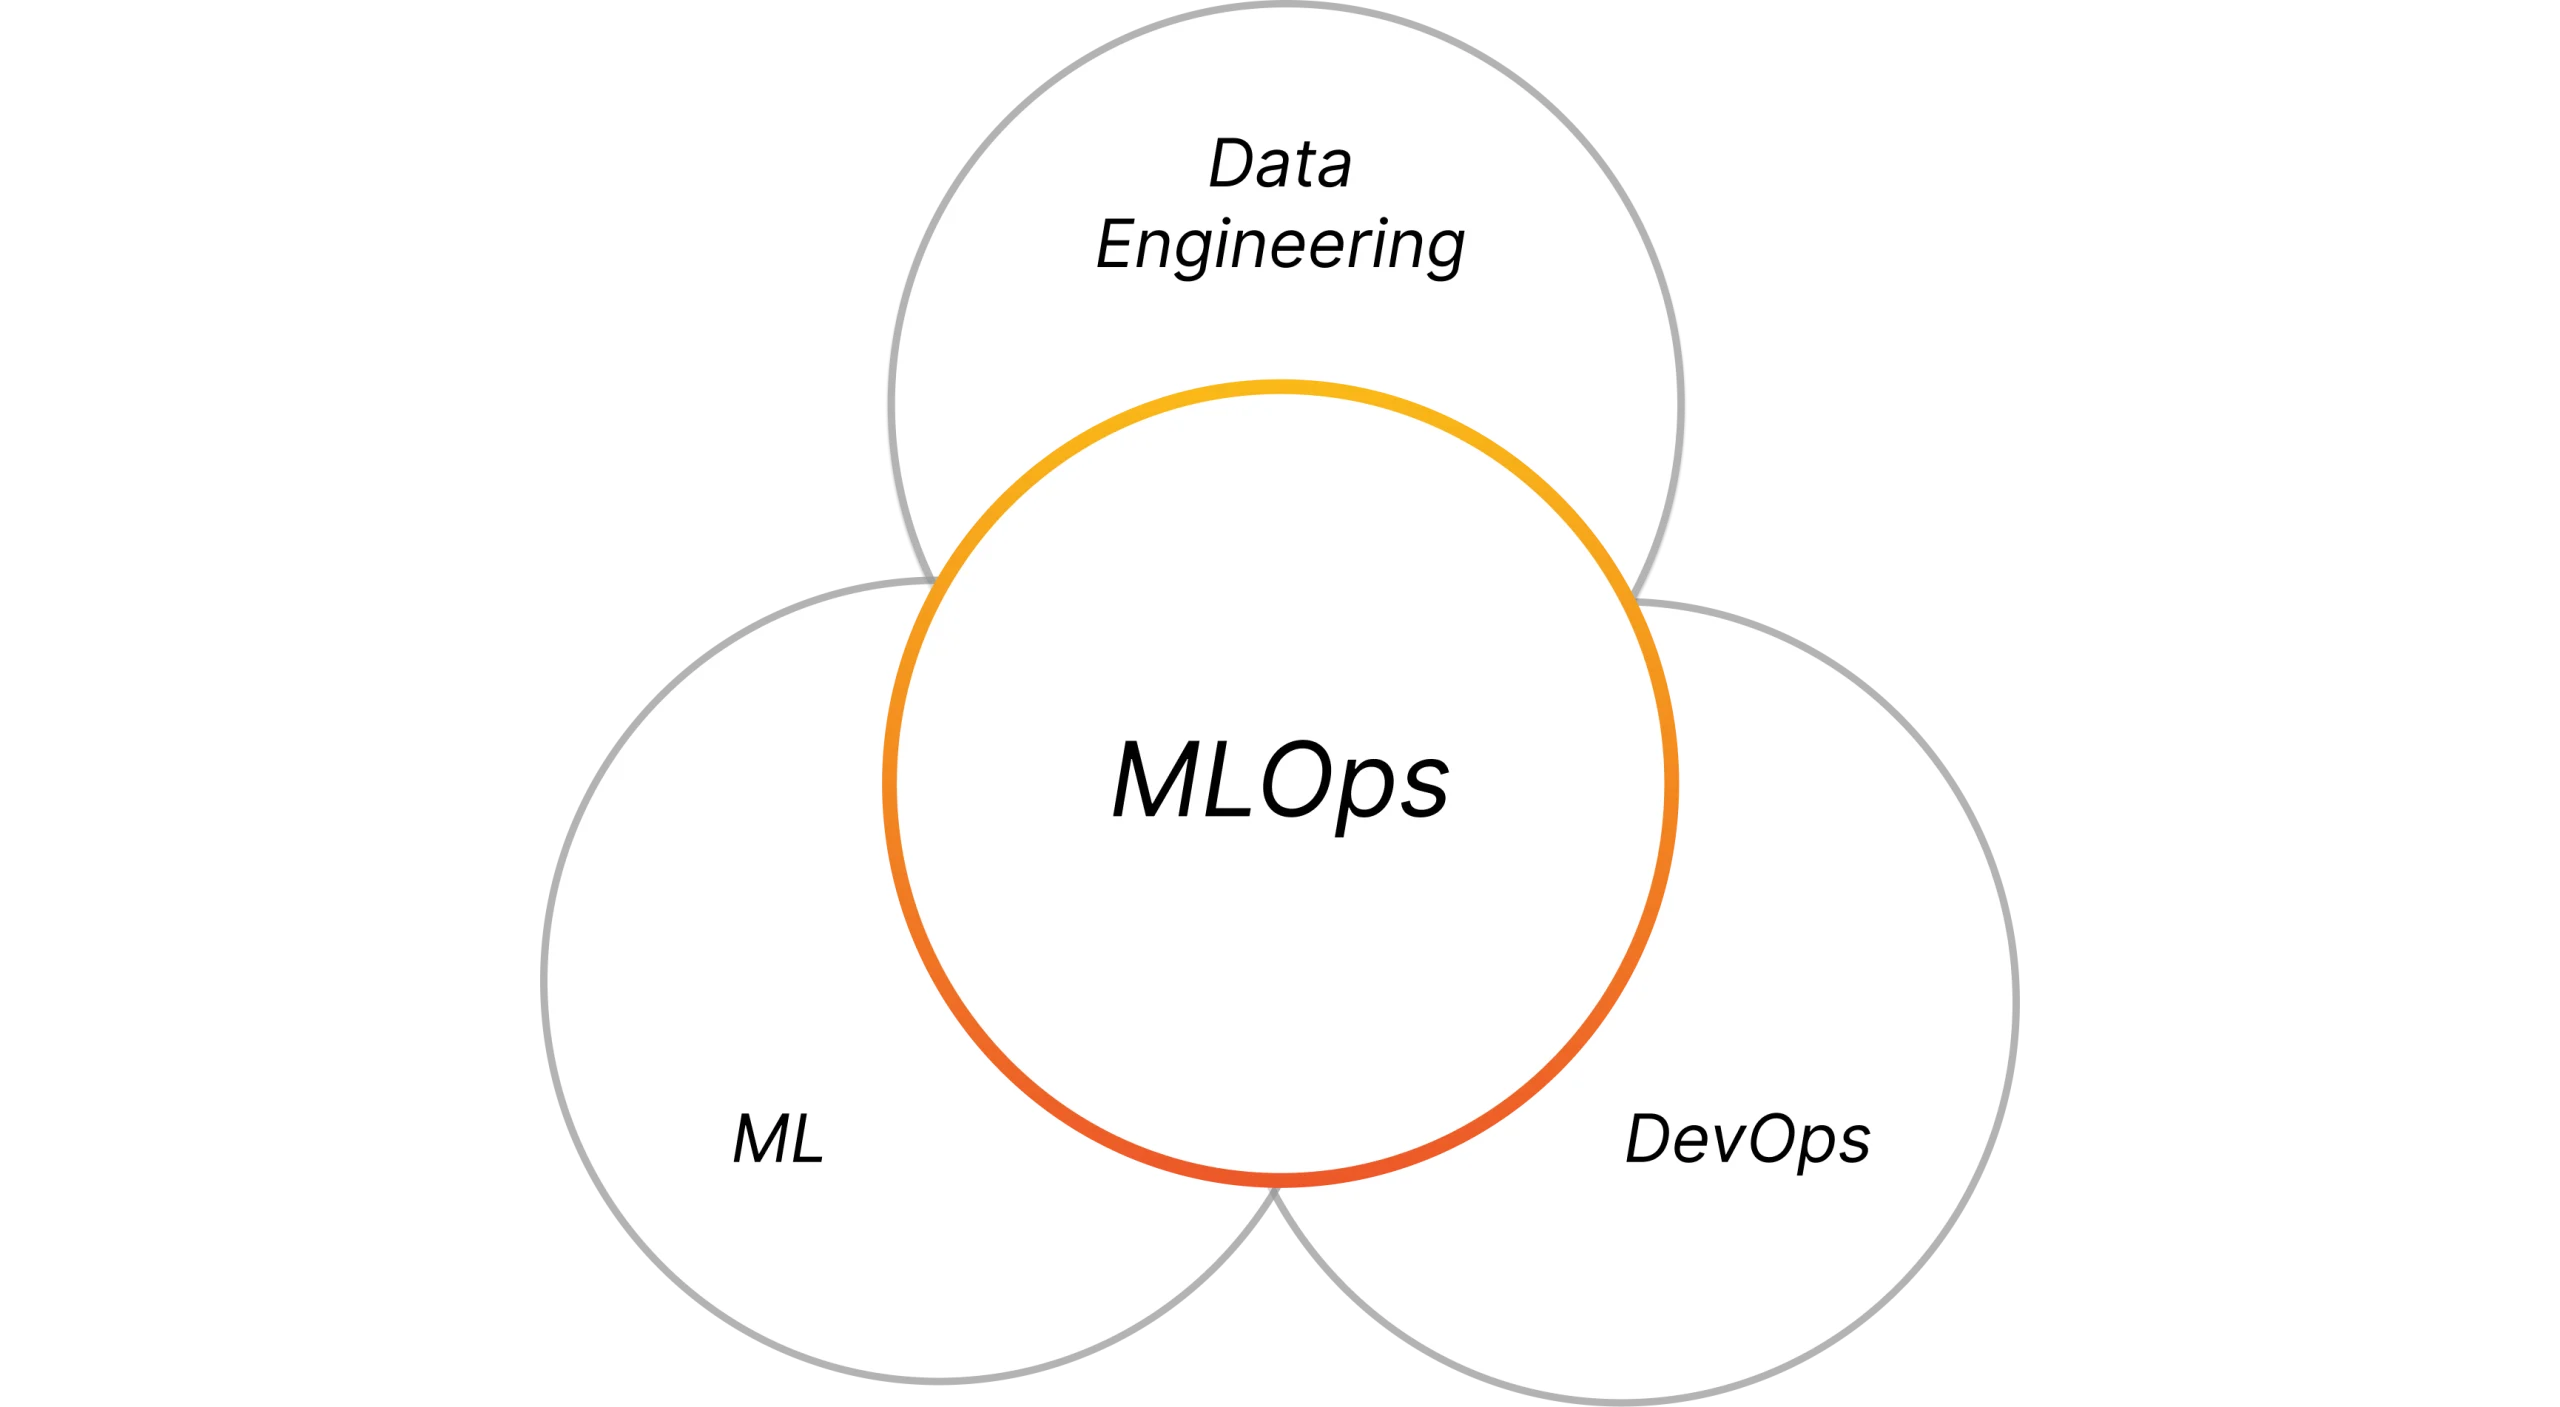 Image showing the intersection between Machine Learning (ML), Development Operations (DevOps), and Data Engineering (DE) in the context of MLOps. The diagram features three overlapping circles, with ML, DevOps, and DE written in each circle, respectively. The overlapping areas are labeled MLOps and illustrate how the three fields come together in this practice